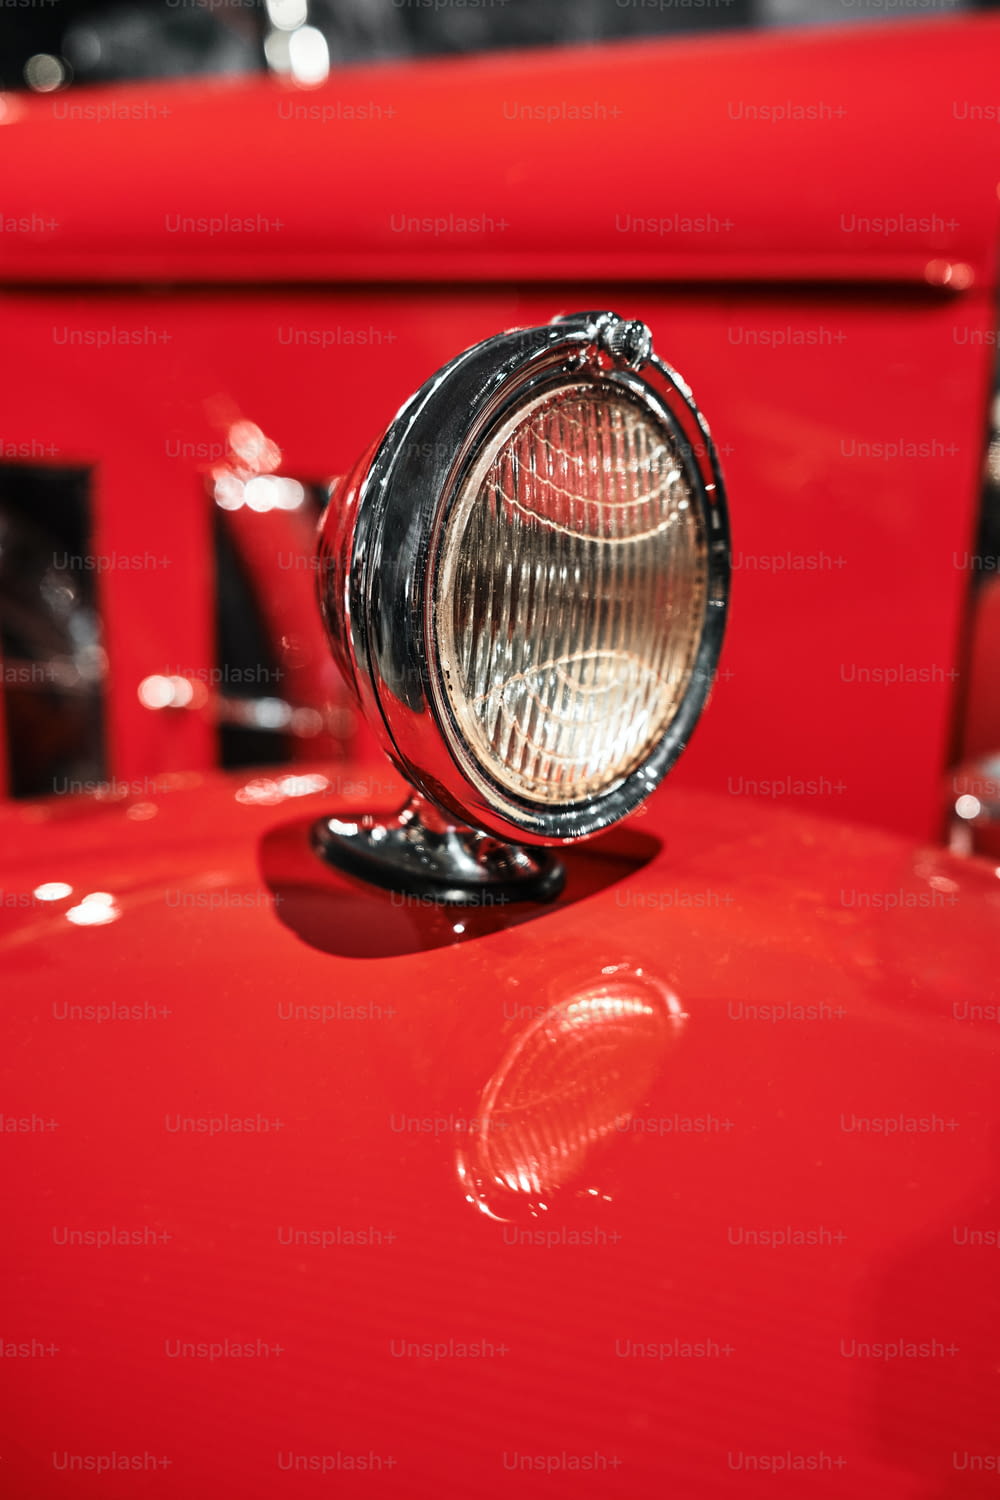 a close up of a light on a red car